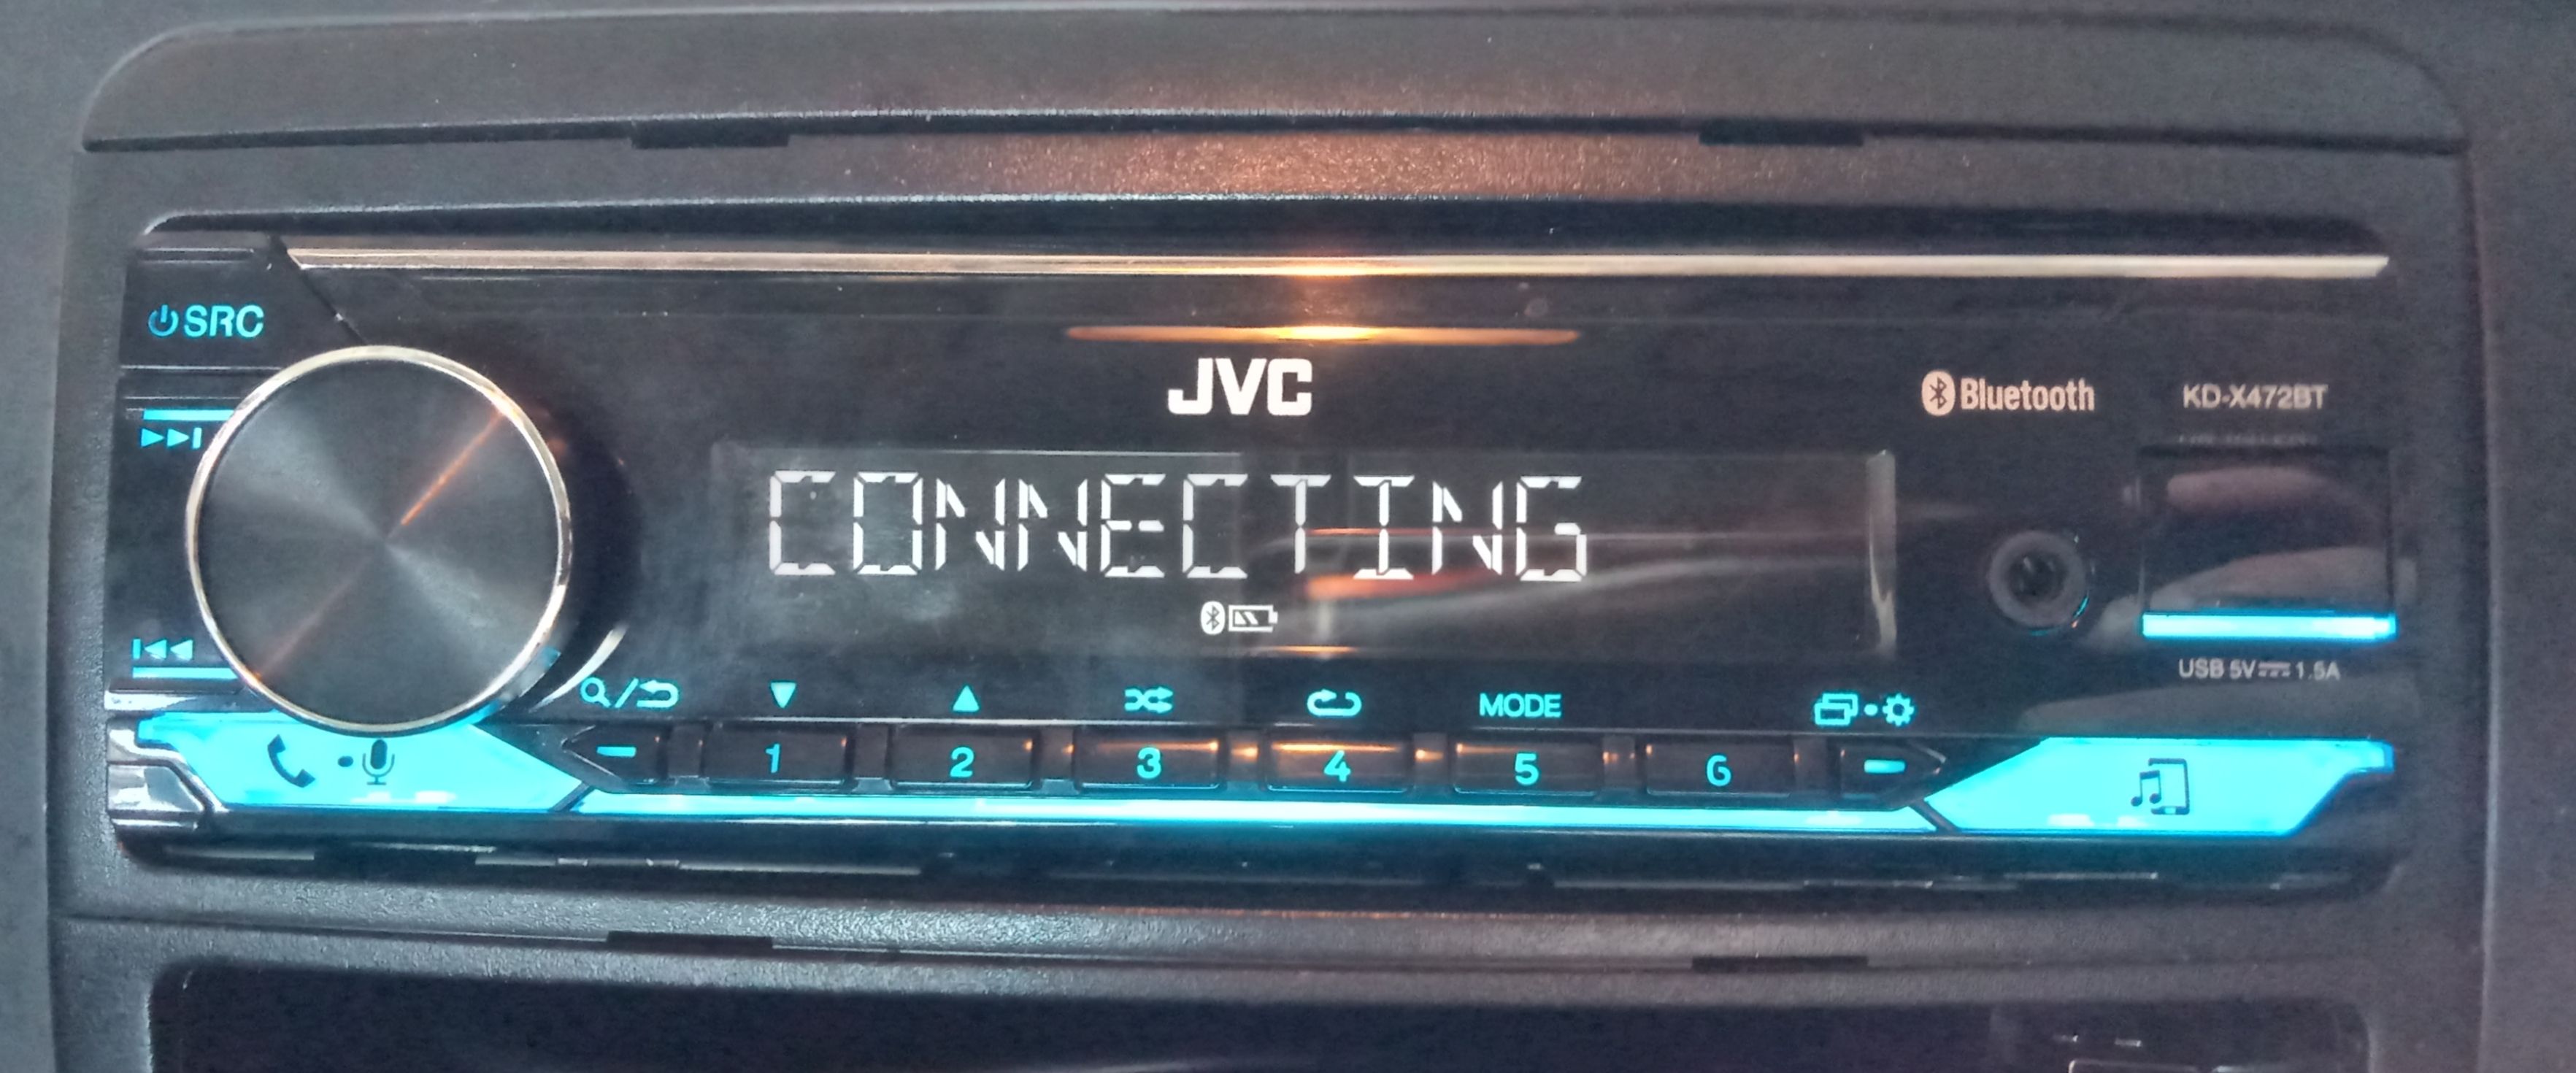 Spotify Connect JVC KD-X472DBT doesnt work "Connec... - The Spotify  Community